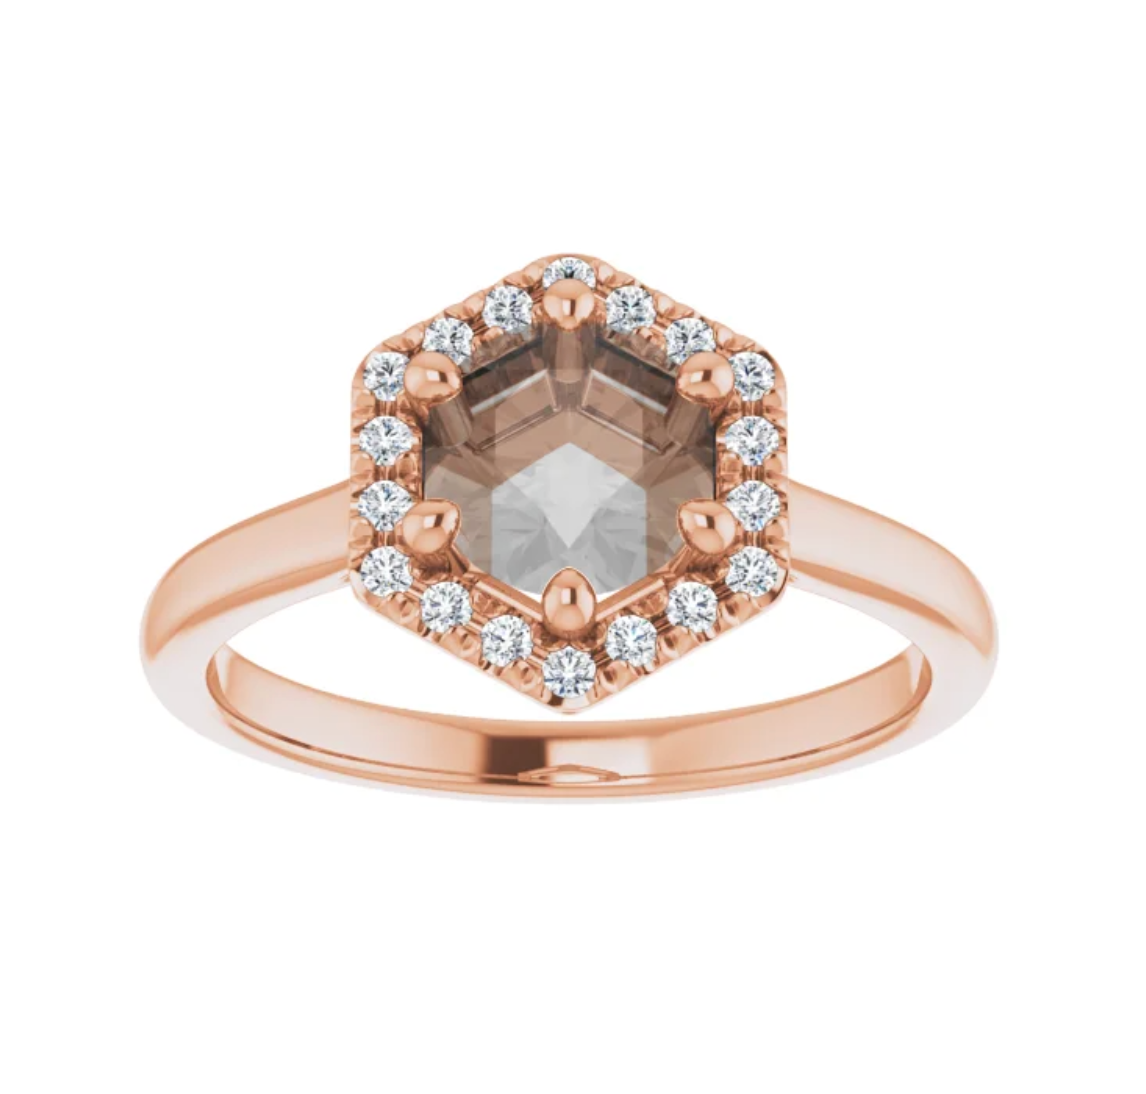 Sia Setting - Midwinter Co. Alternative Bridal Rings and Modern Fine Jewelry